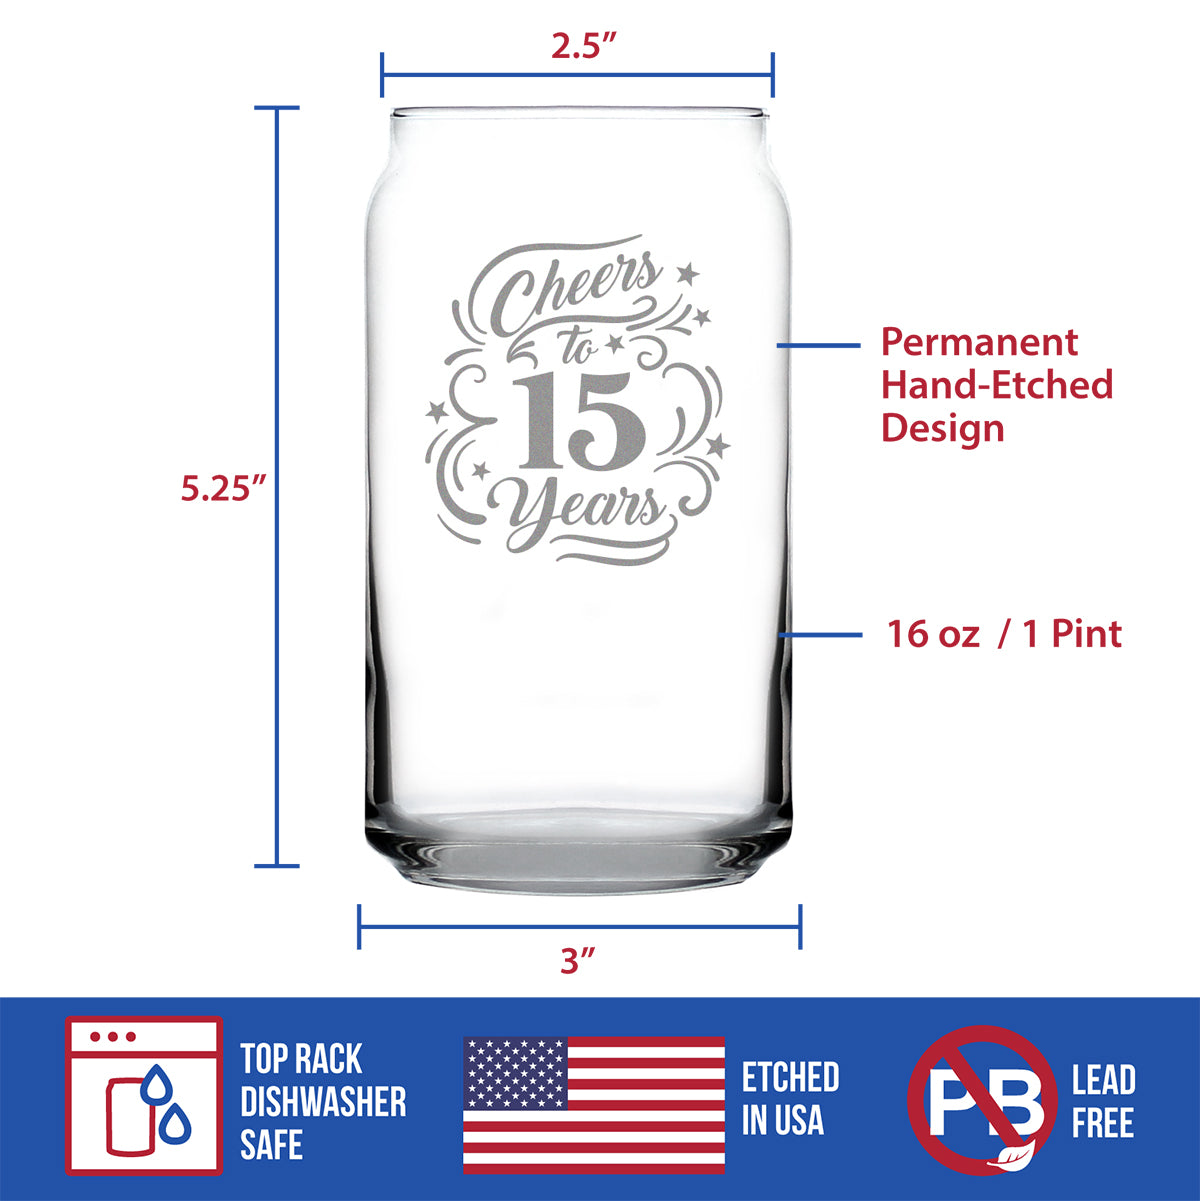 Cheers to 15 Years - Beer Can Pint Glass Gifts for Women &amp; Men - 15th Anniversary Party Decor - 16 Oz Glasses